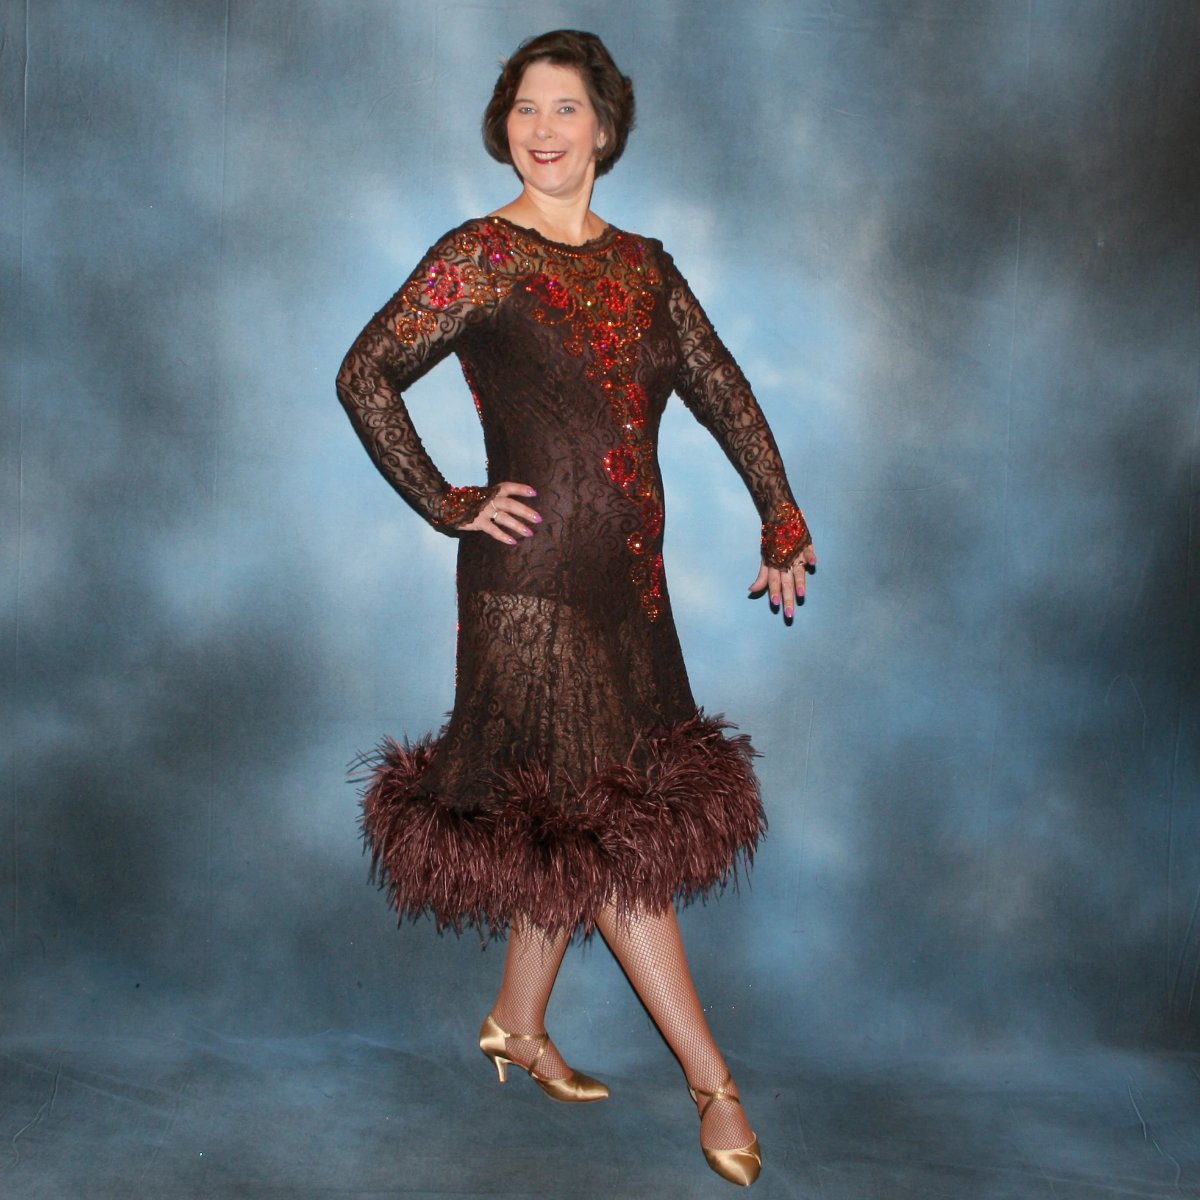 Crystal's Creations side view of Chocolate brown Latin/rhythm dance dress of stretch lace lavished with detailed Swarovski stonework done in Indian pink* & crystal copper… with ostrich feathers adorning the skirt edge…and includes under bodysuit.